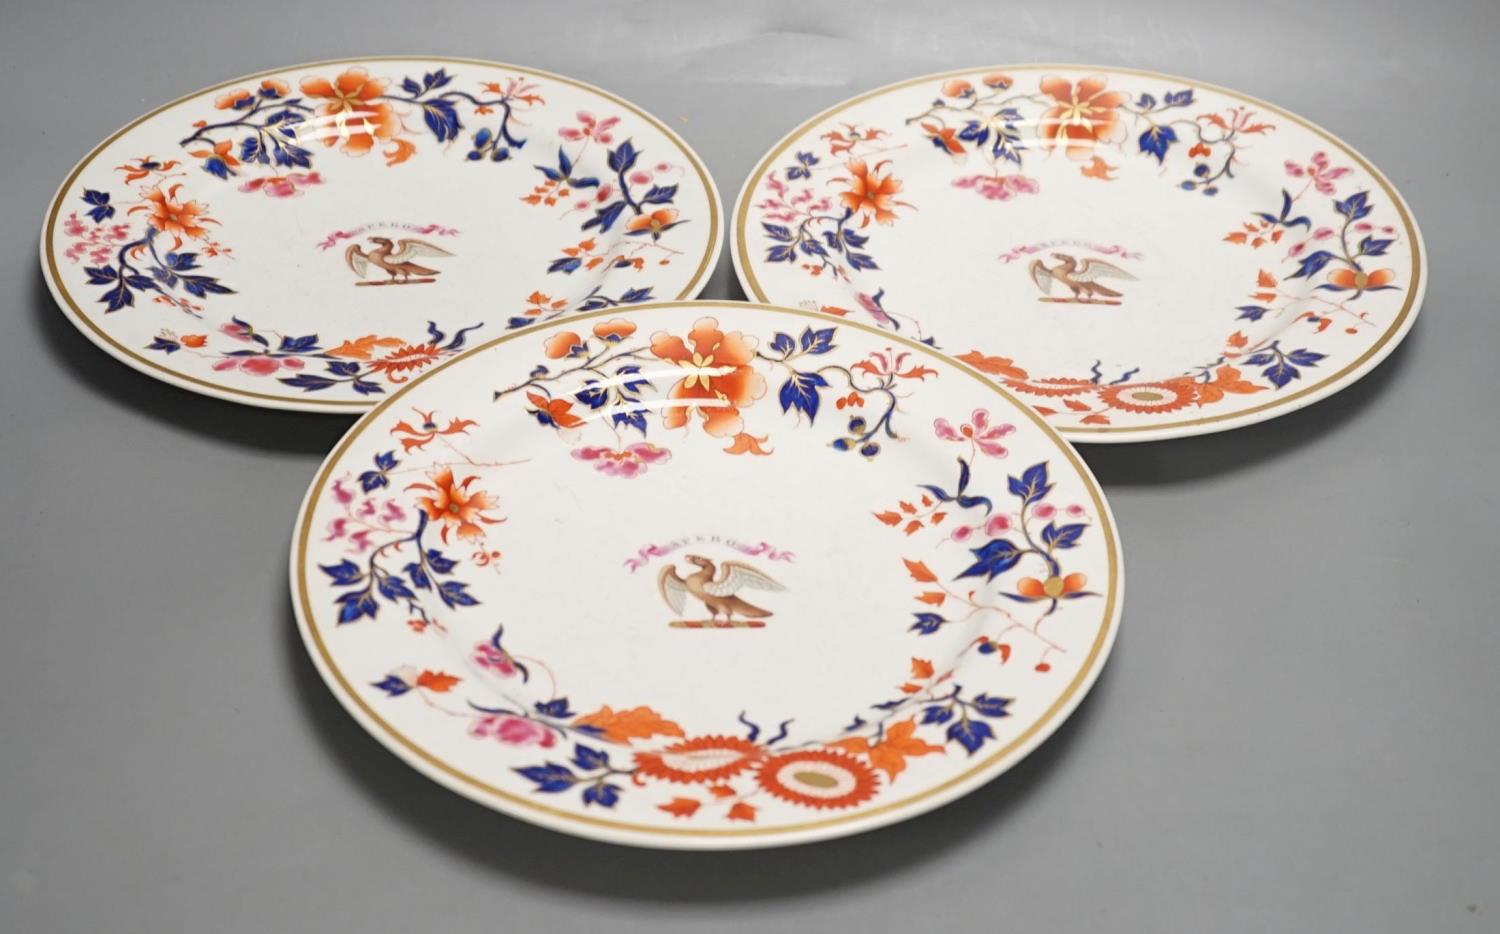 A Flight Barr and Barr set of three armorial plates decorated in imari style with leaves and flowers